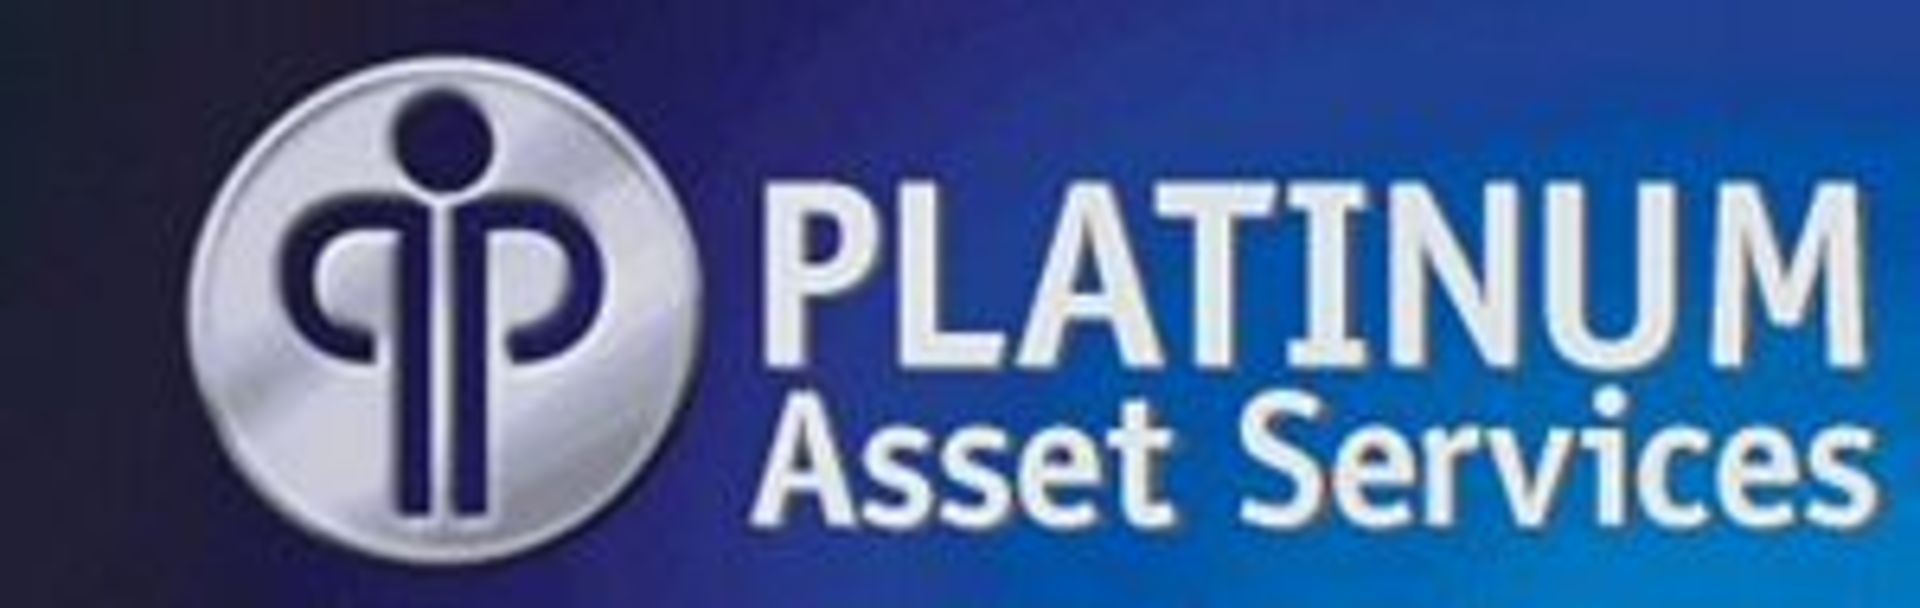 This auction is being conducted by Platinum Asset Services.